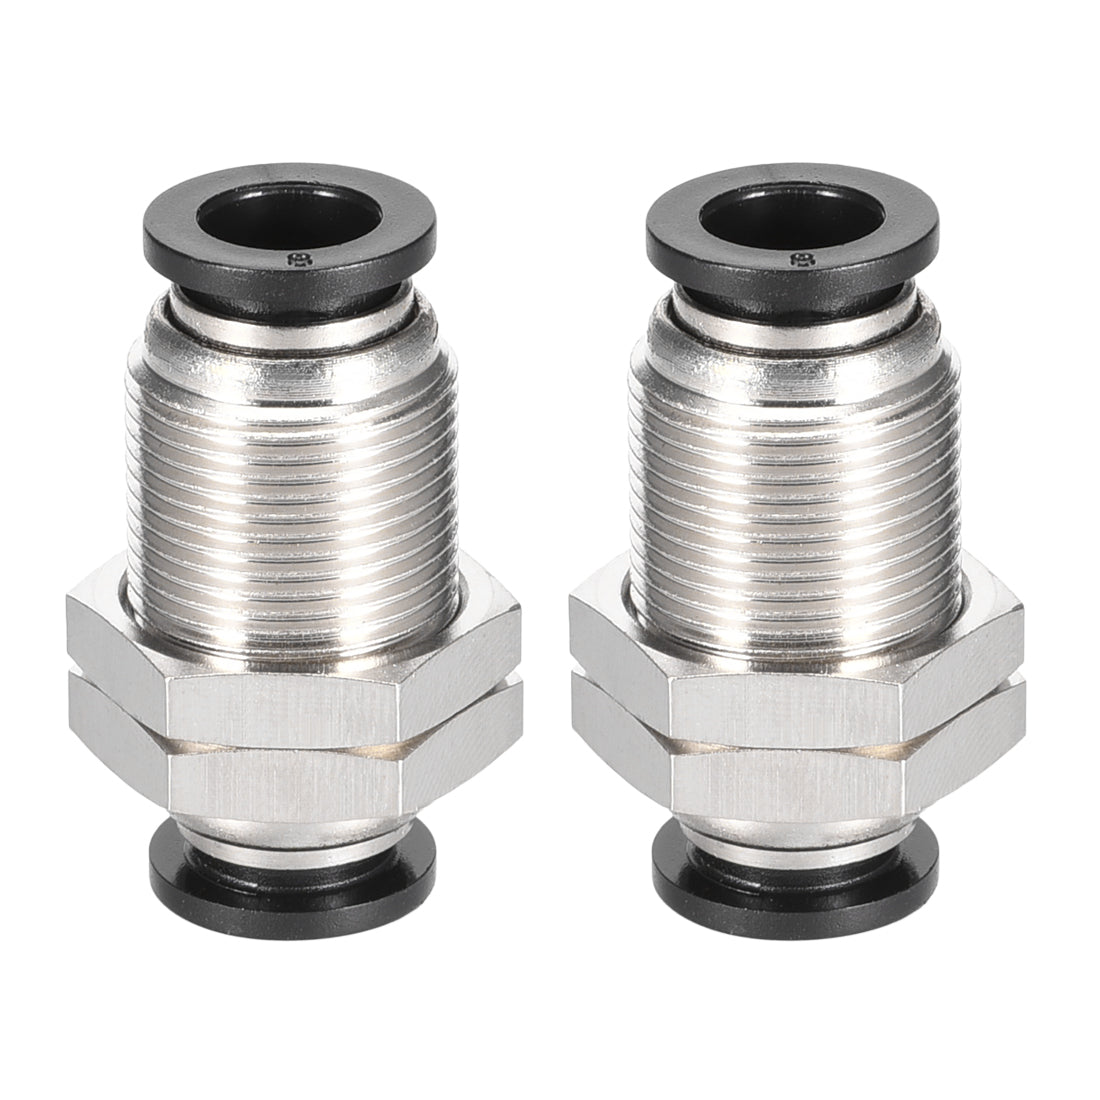 uxcell Uxcell Straight Pneumatic Push to Quick Connect Fittings Bulkhead Union 8mm Tube OD X 8mm Tube OD 2pcs